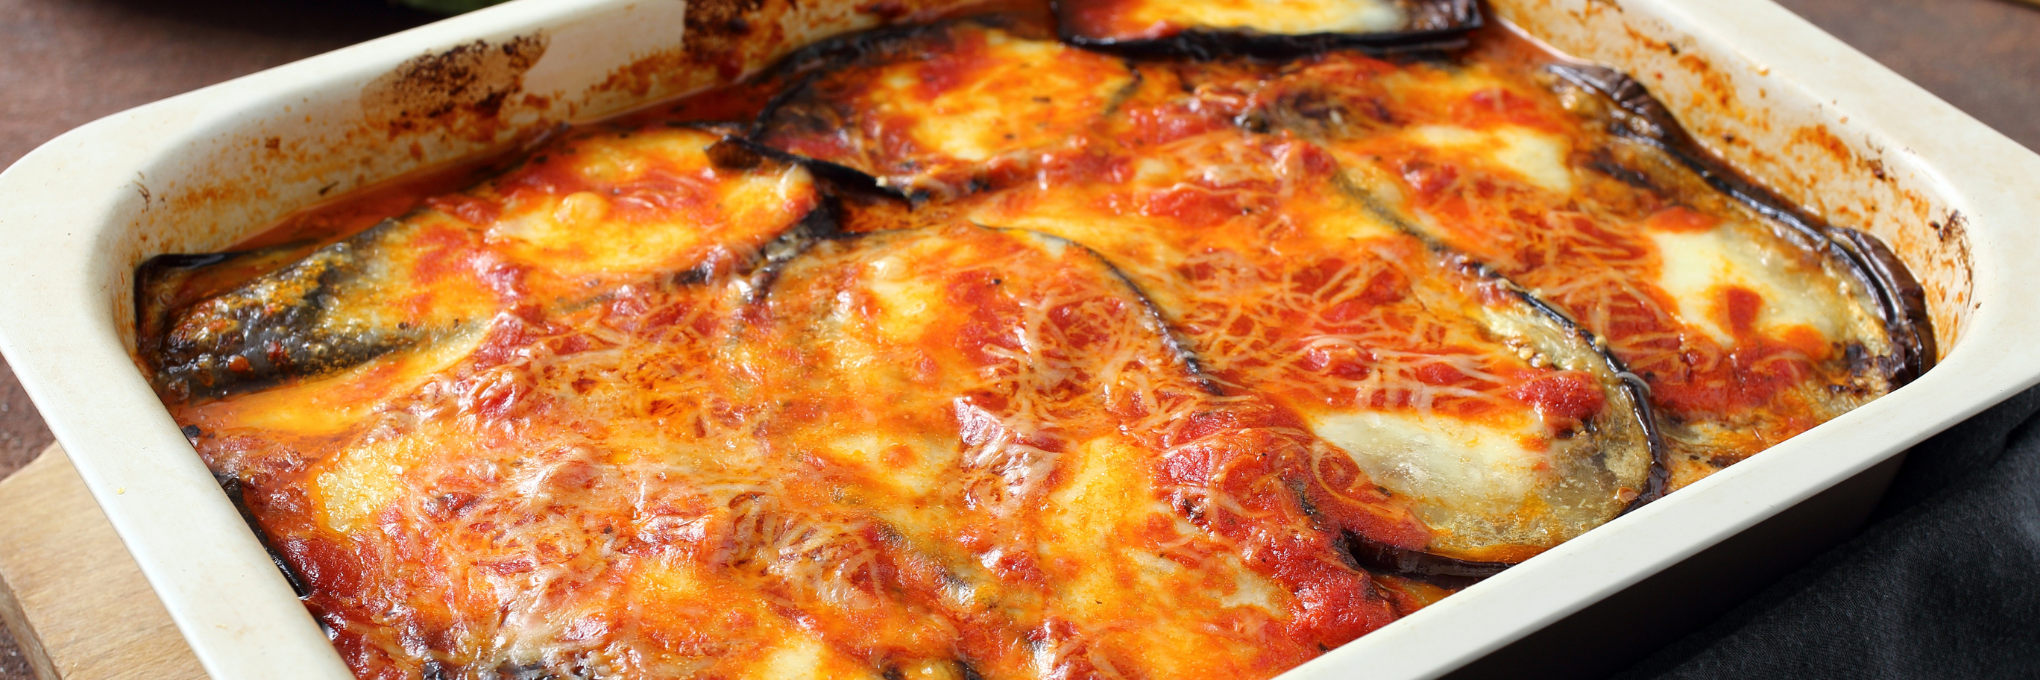 What Wine Pairs Well with Eggplant Parm?